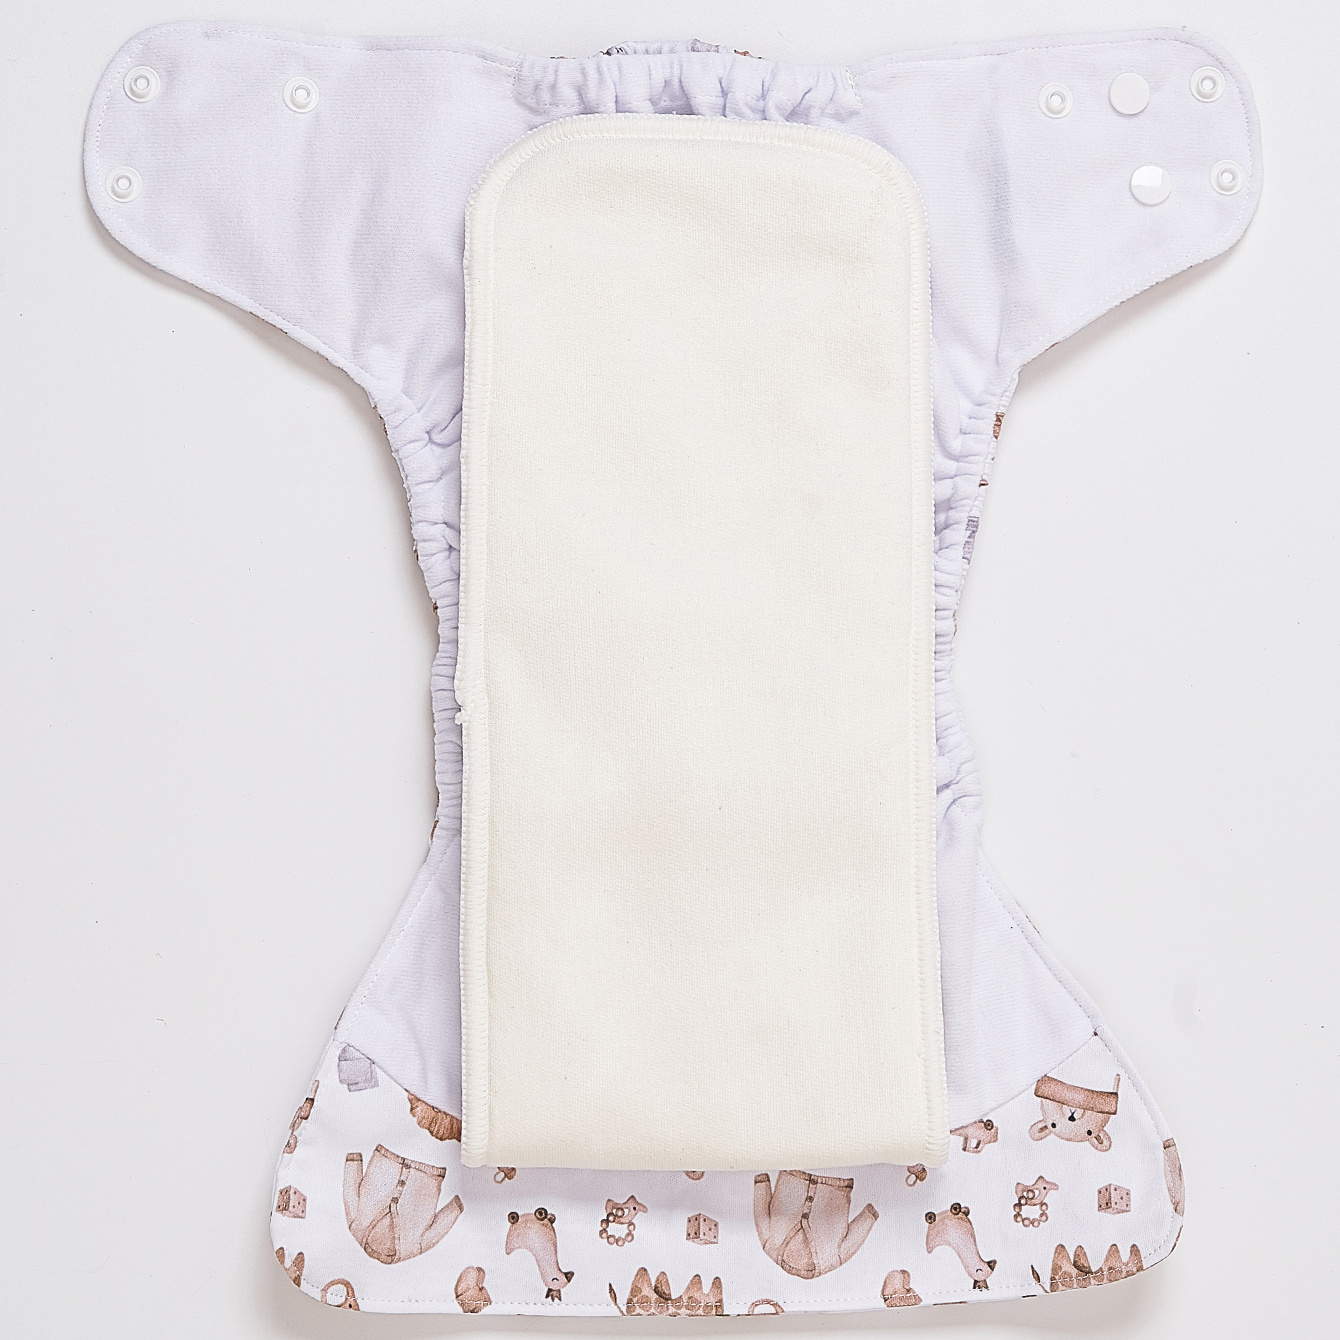 happyflute 4pcs set washable eco friendly cloth diaper covers adjustable nappy reusable cloth diapers cloth nappies for 3 15kg baby details 5